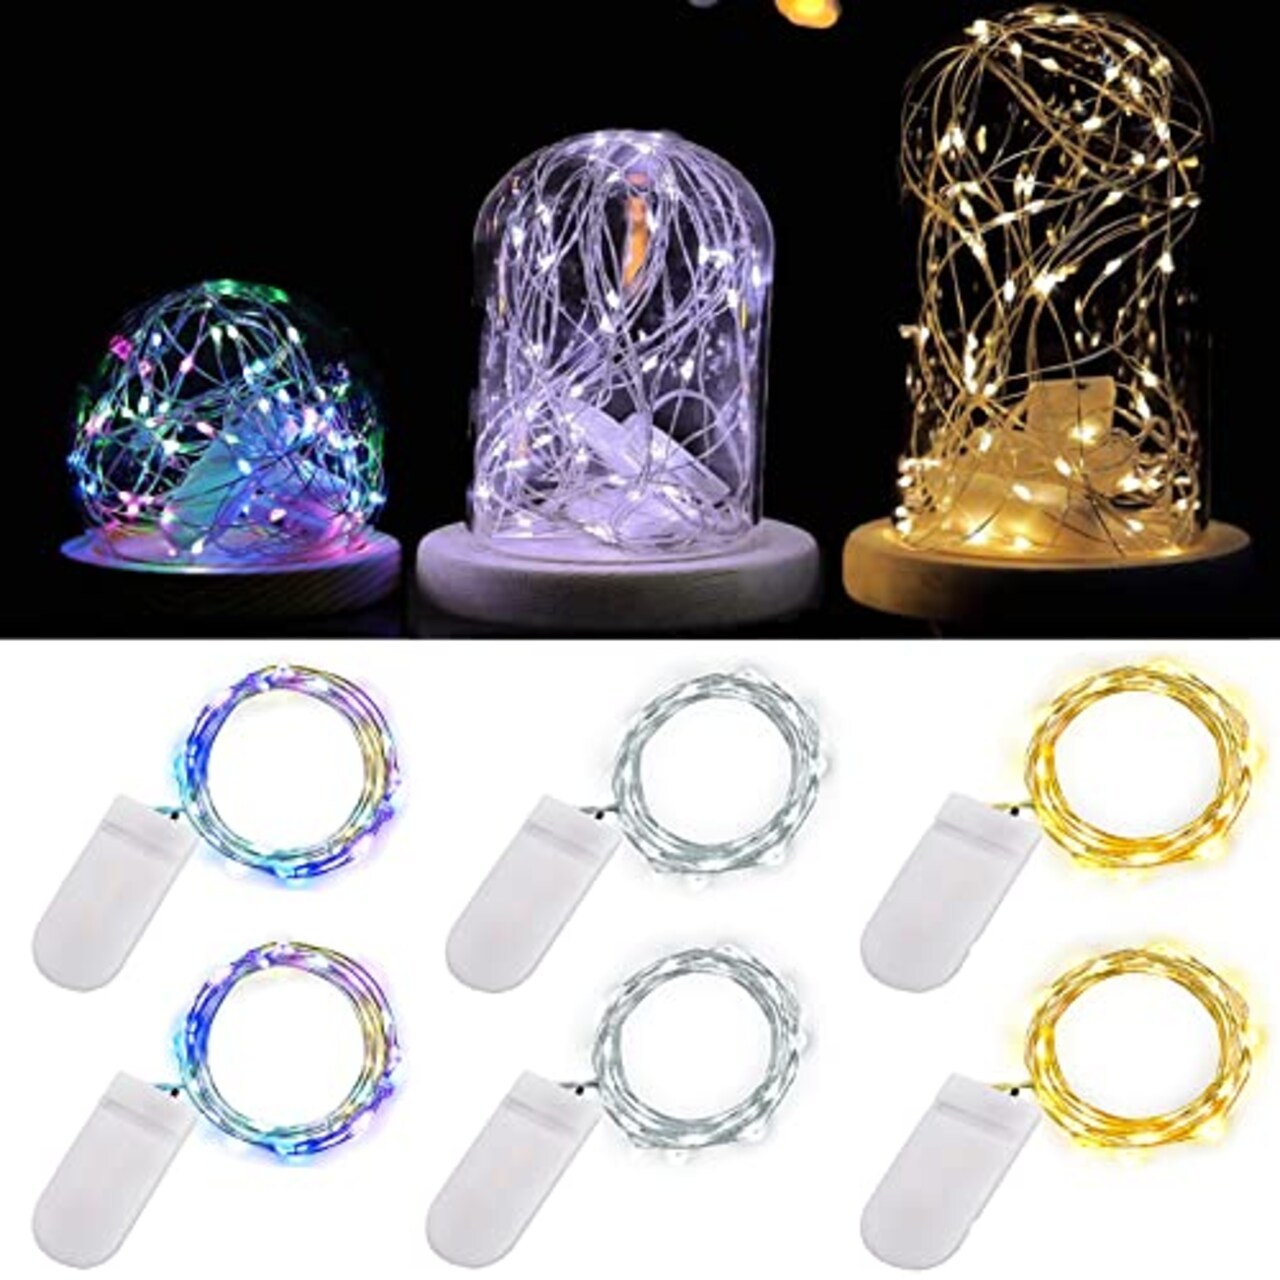 Ostwiki Fairy Lights Battery Operated String Lights, 6 Pack Mini Lights 20 LED 7ft Twinkle Firefly Starry Light for DIY Craft Mason Jar Bedroom Wedding Party Table Christmas Decoration (Mix-Colored)